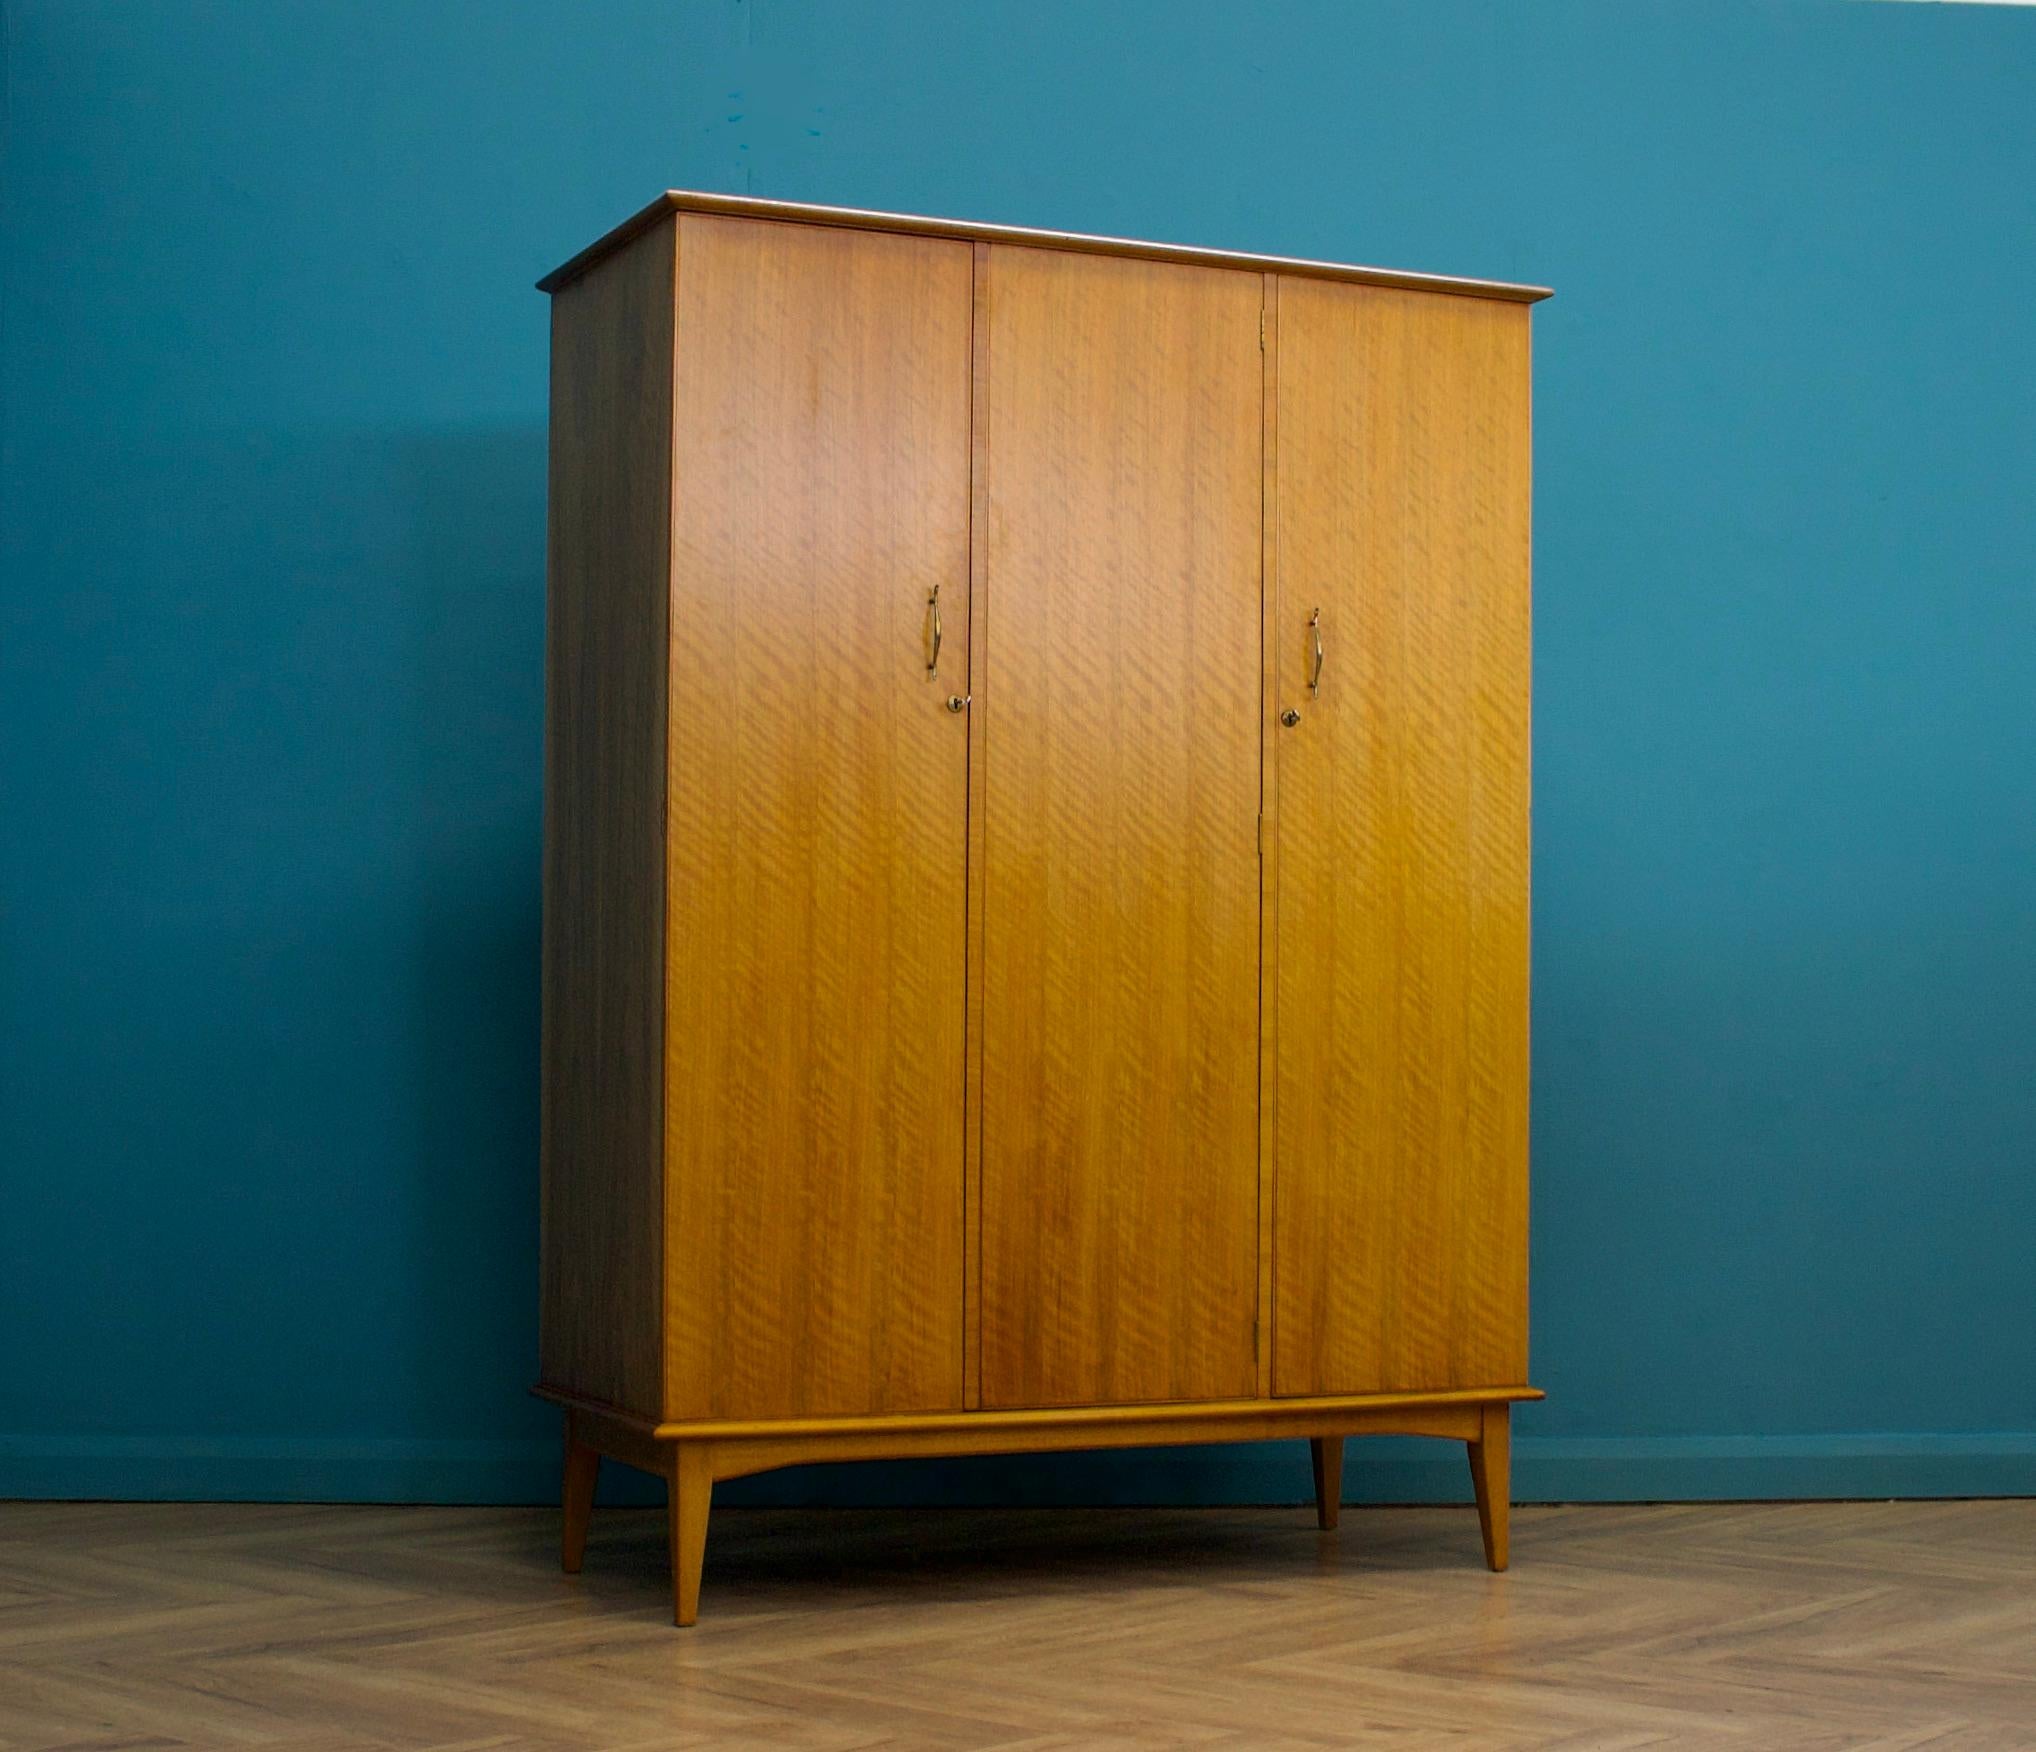 A walnut freestanding three door wardrobe by Alfred Cox - these pieces were usually retailed through Heals department store during the 1950s and 1960s
Internally there are two hanging rails and a shelf
The attractive legs are slightly tapered and